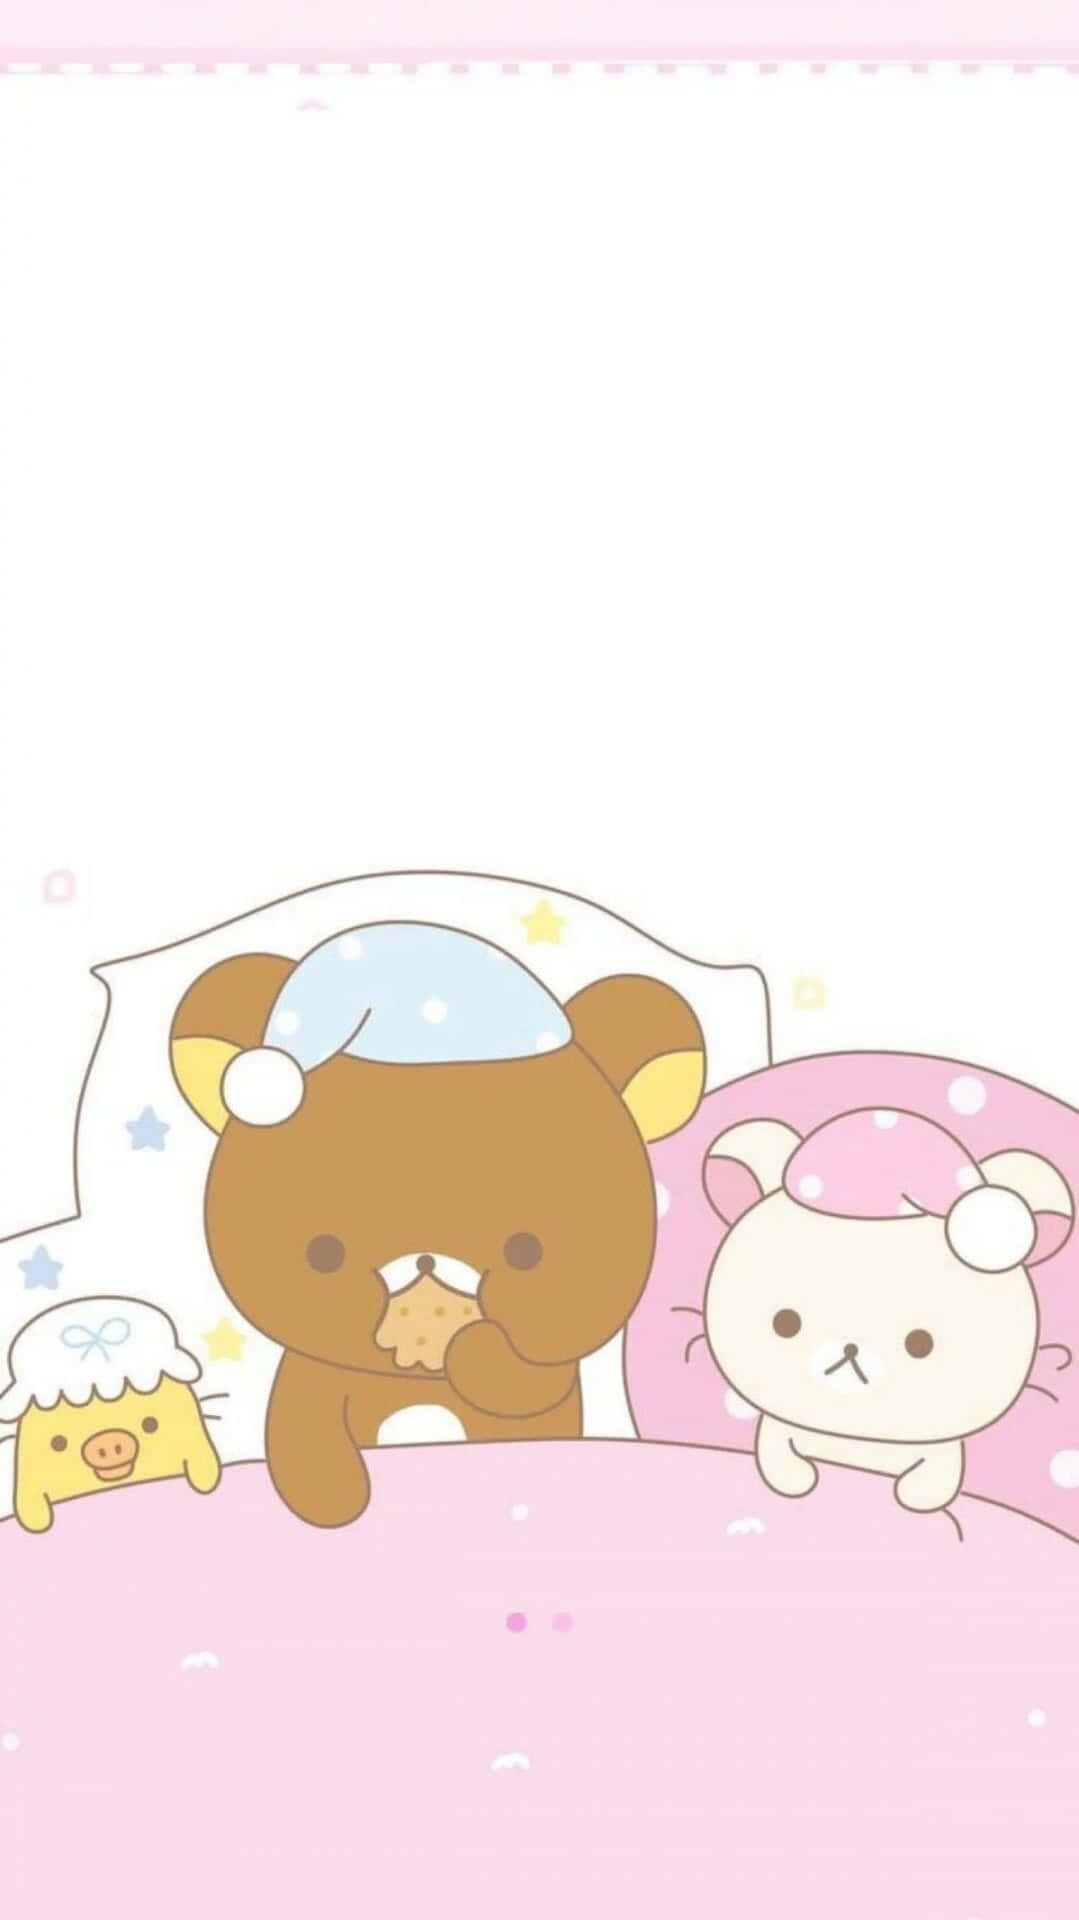 “Adorable Rilakkuma Being Cuddly With Friends” Wallpaper